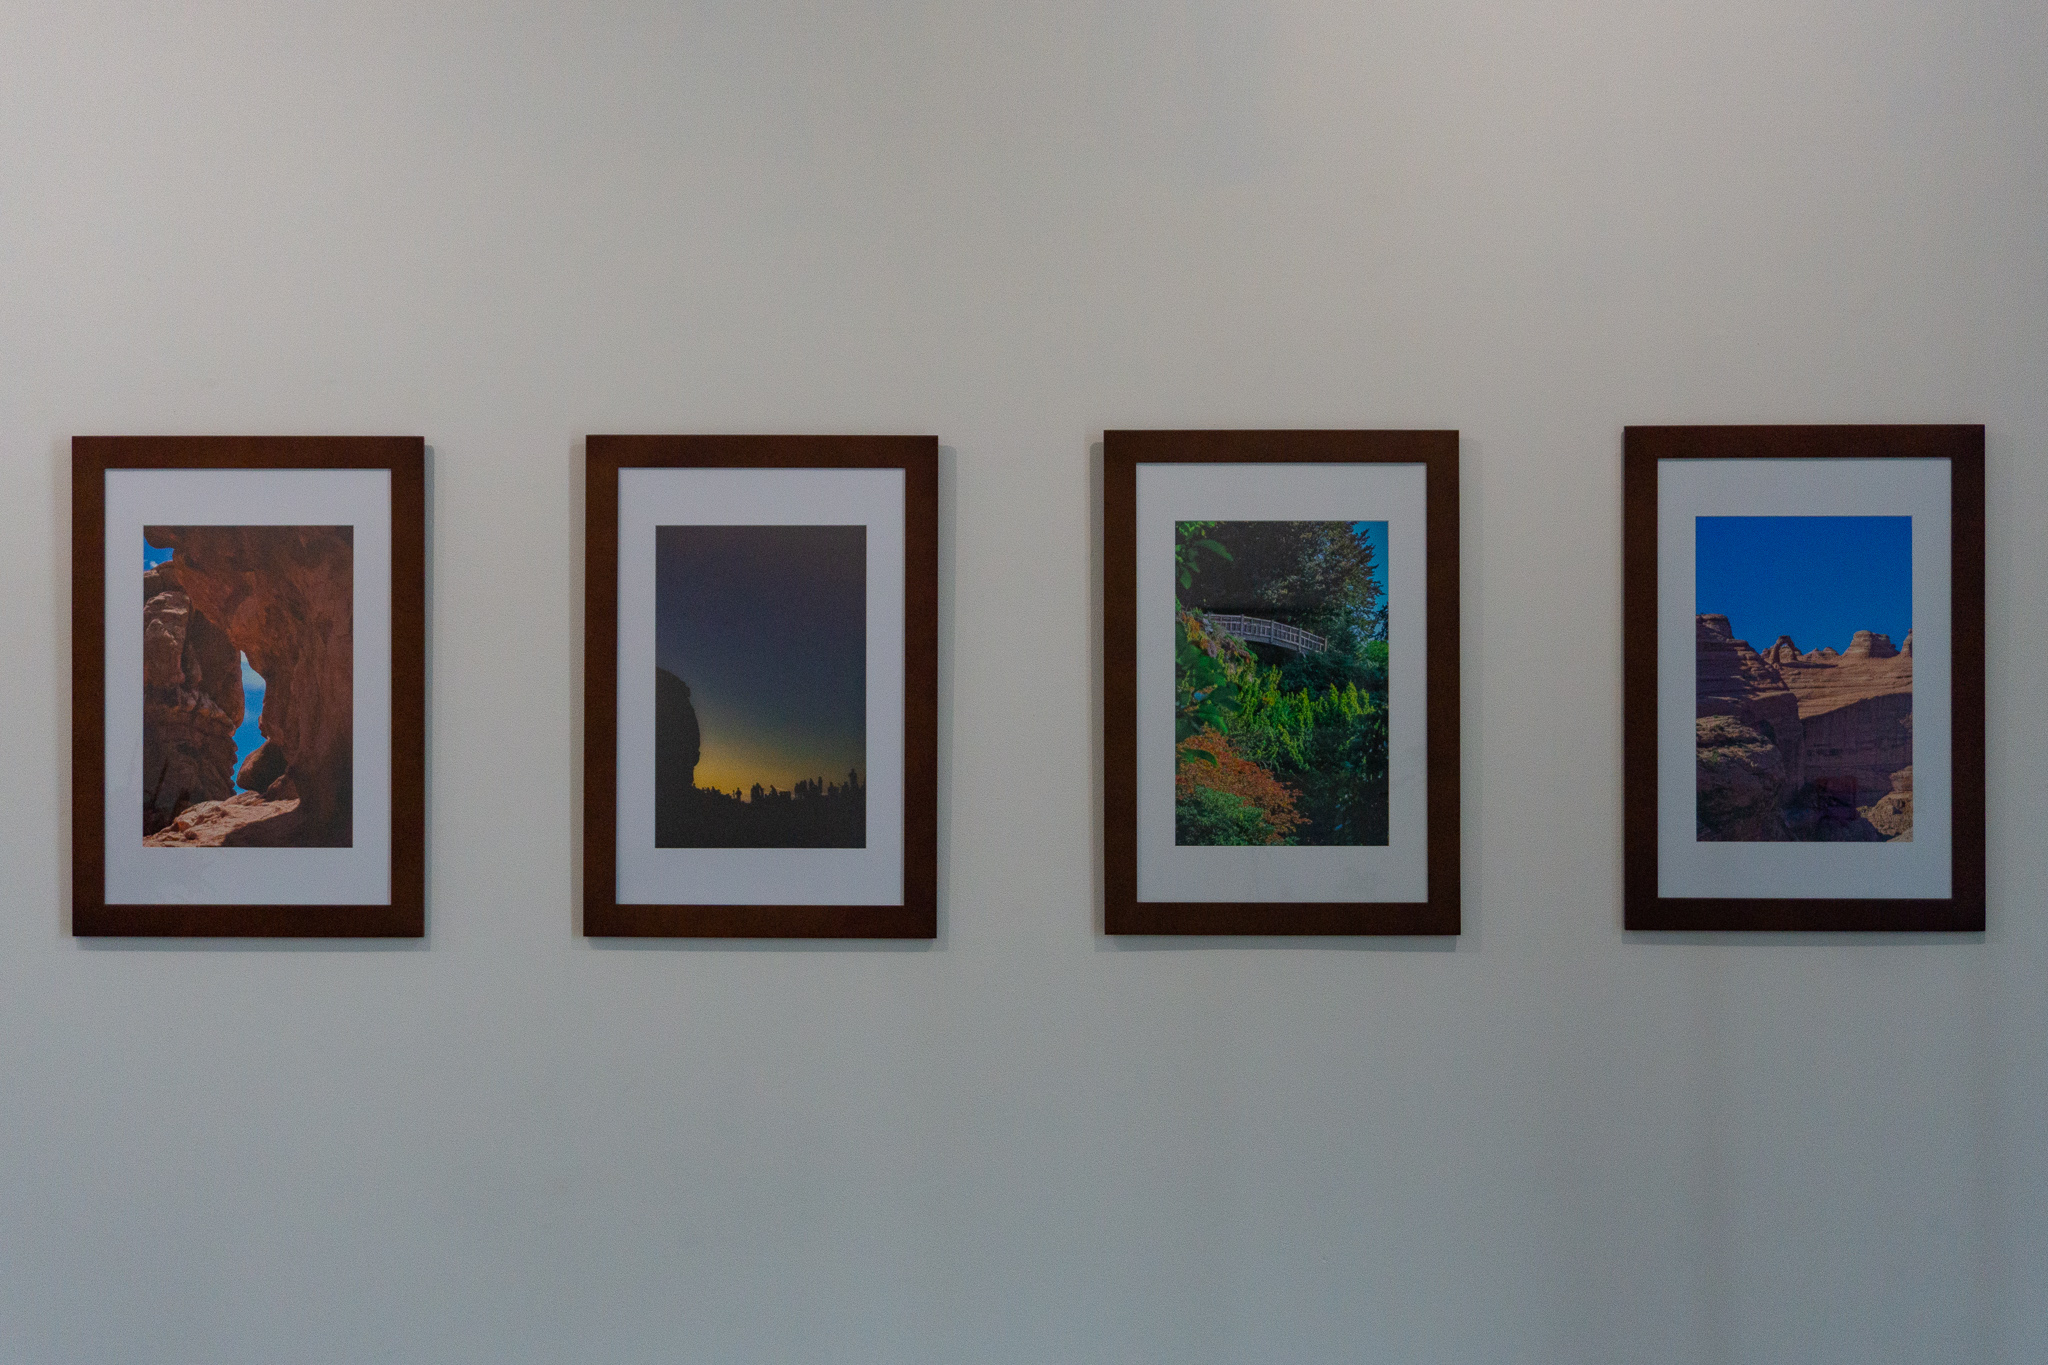 Framed environmental photographs on the wall